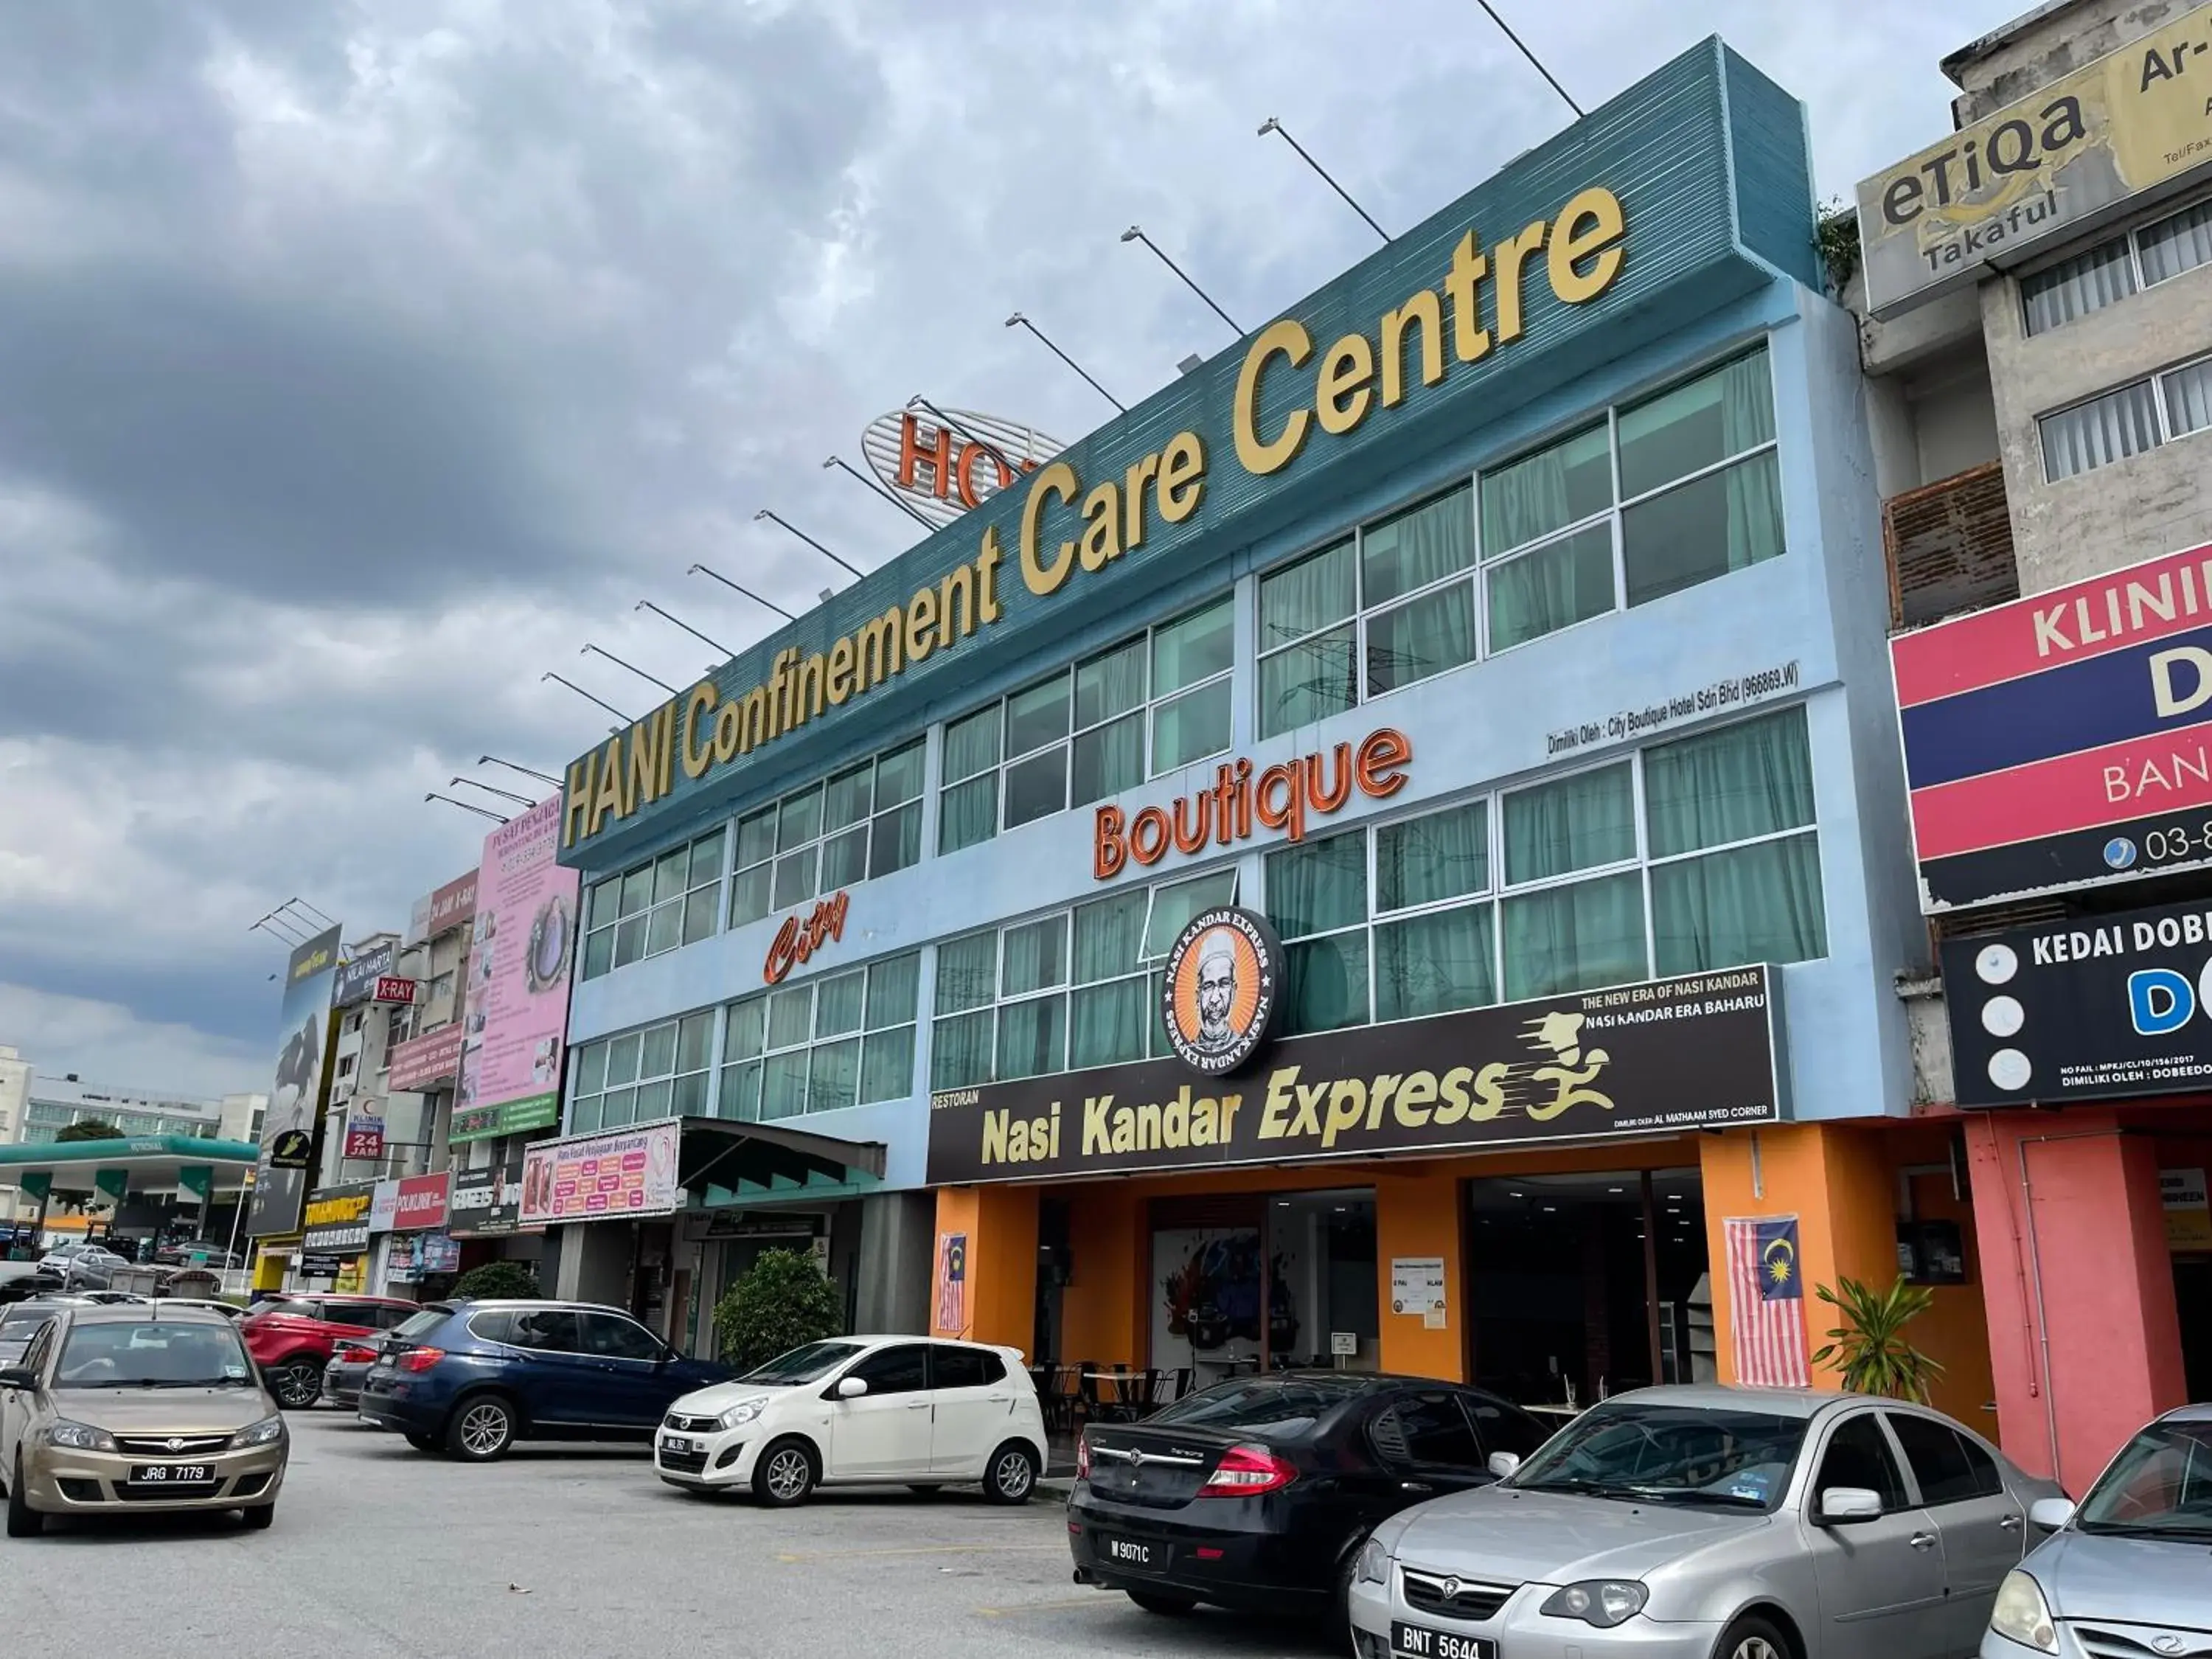 Property Building in City Boutique Hotel - Bangi